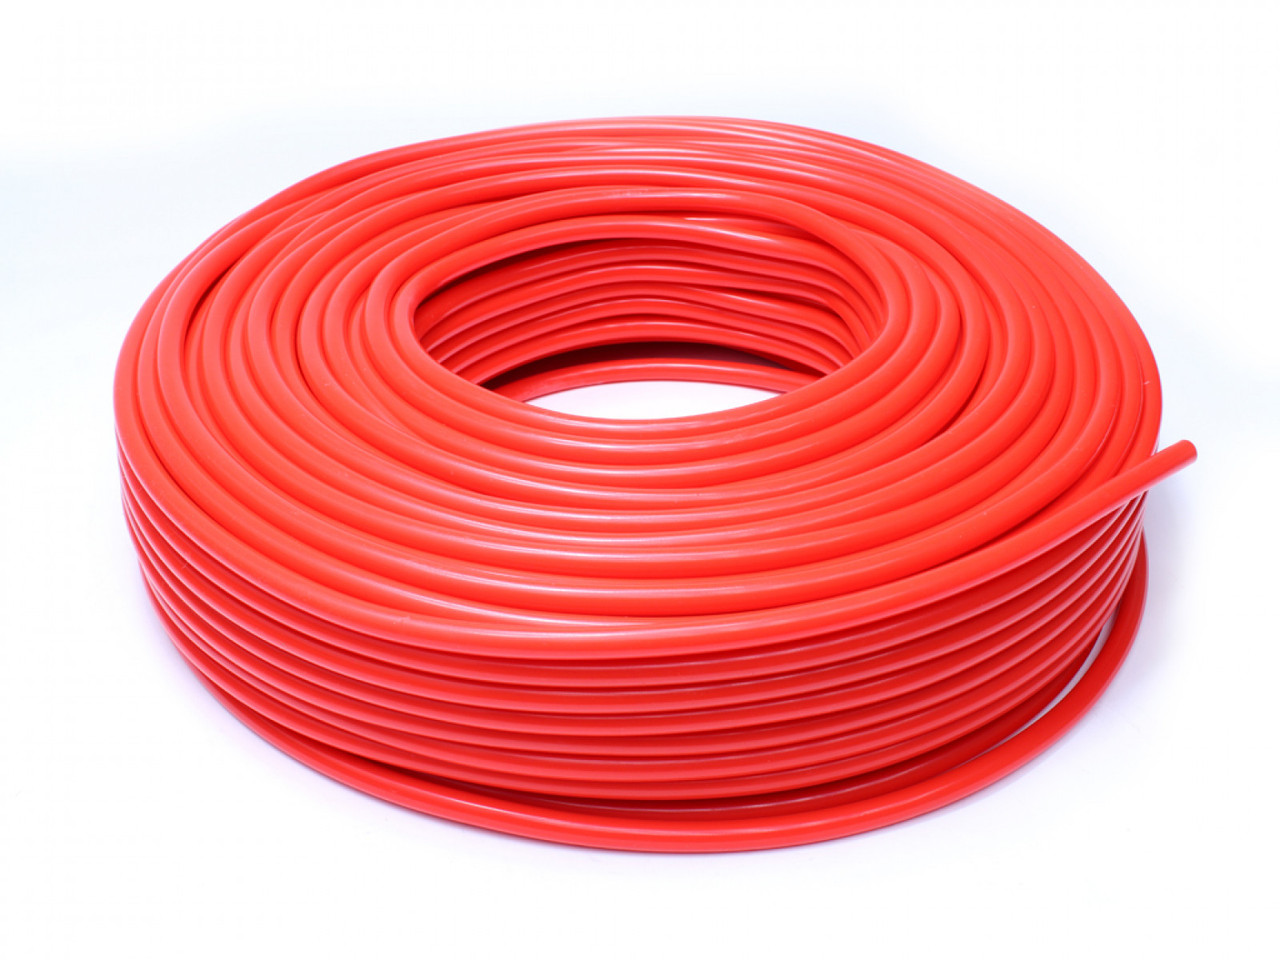 HPS 1/4" (6mm) ID Red High Temp Silicone Vacuum Hose - 50 Feet Pack (HPS-HTSVH6-REDx50)